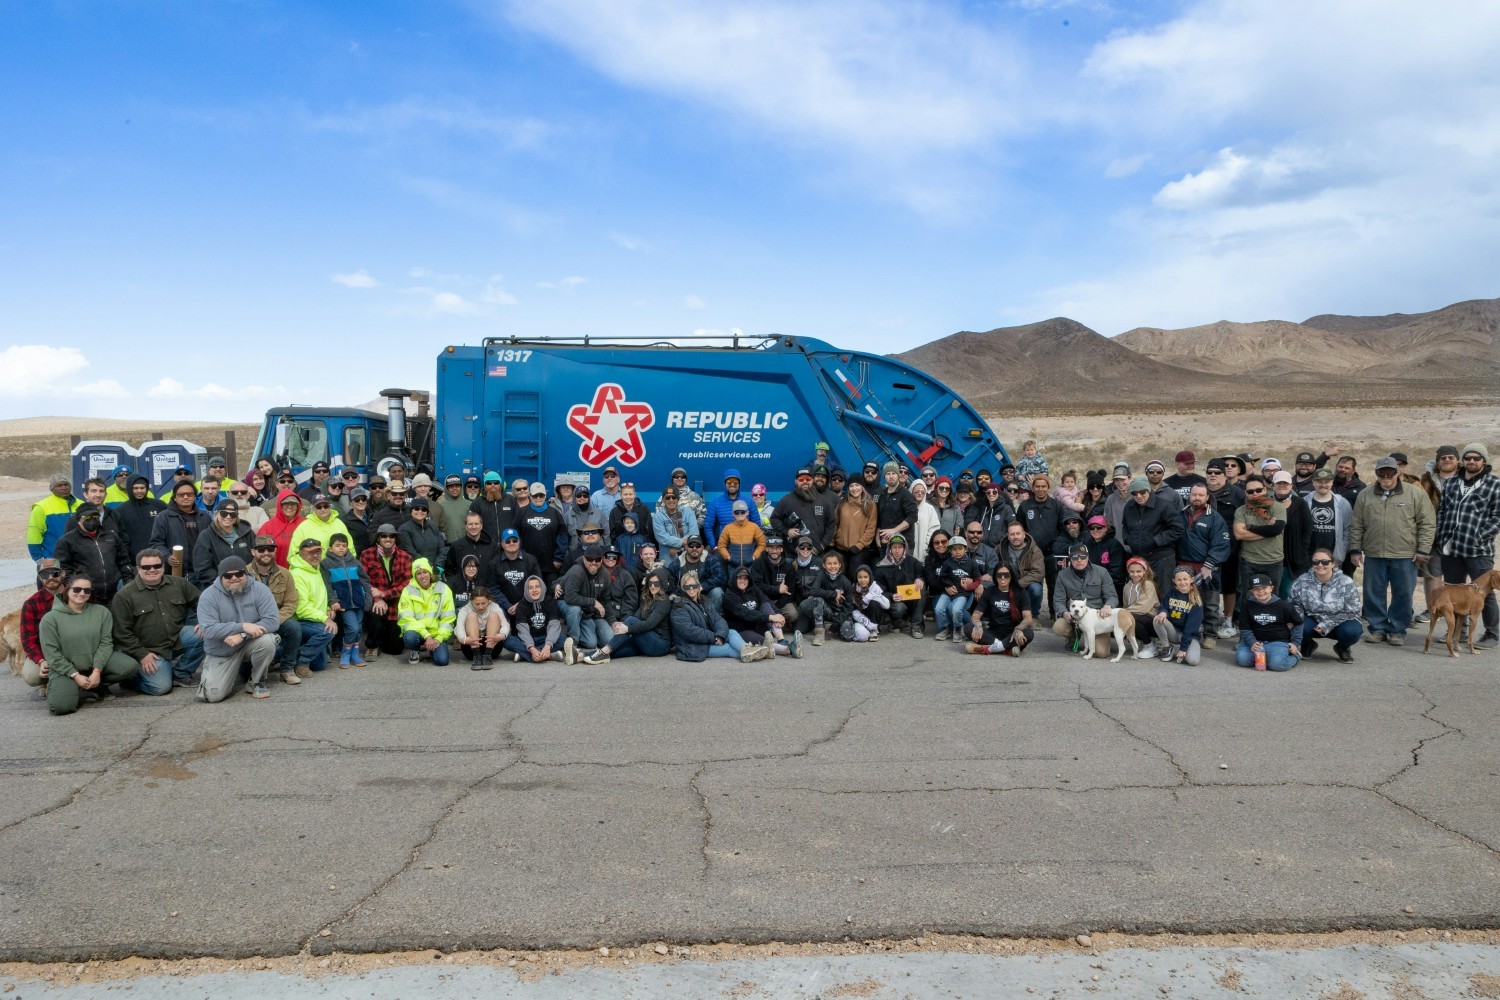 Volunteers organized by Republic Services gather annually to remove illegally dumped waste from the Mojave Desert.